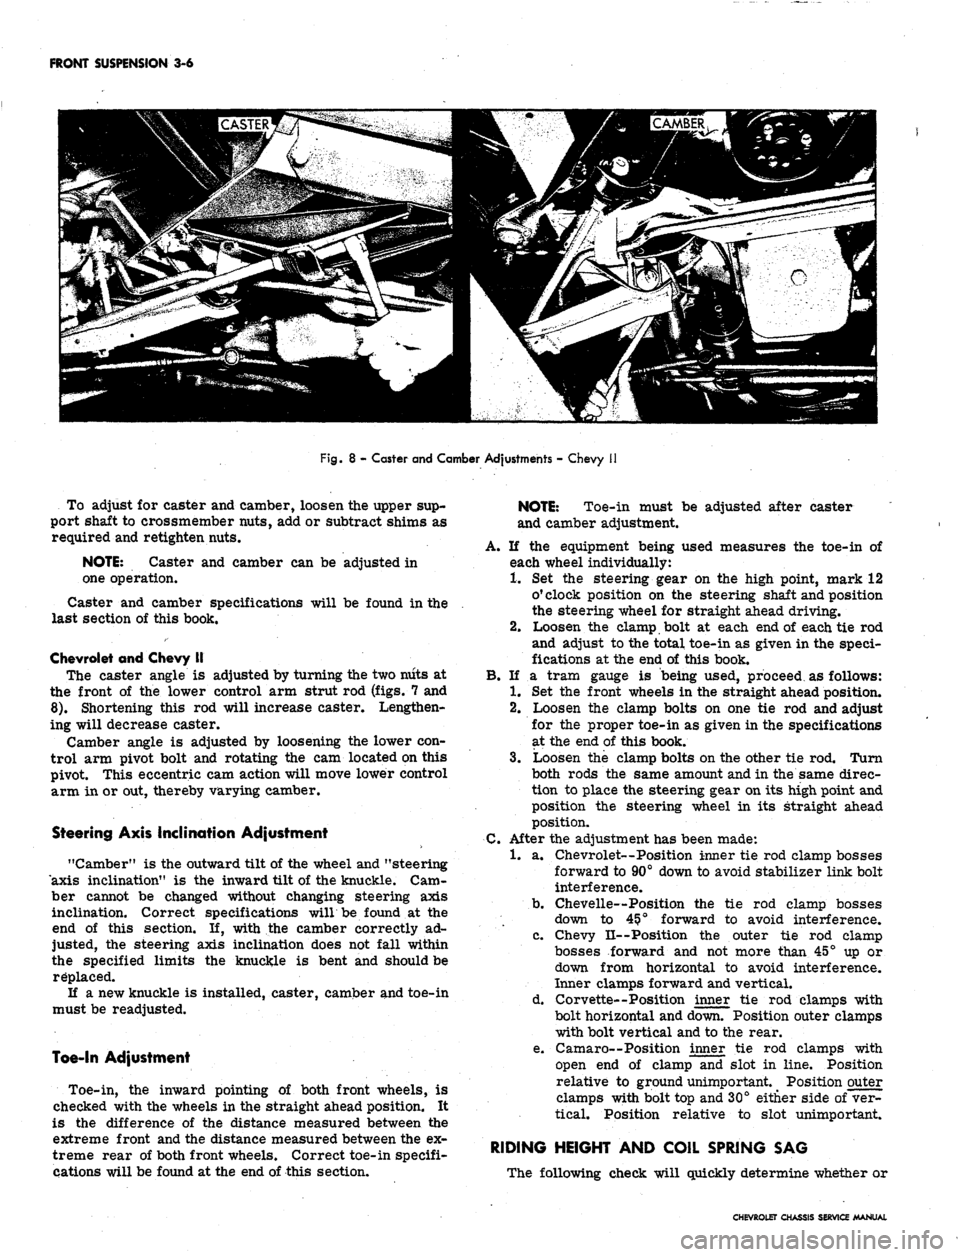 CHEVROLET CAMARO 1967 1.G Chassis Workshop Manual 
FRONT SUSPENSION 3-6

Fig.
 8 - Caster and Camber Adjustments - Chevy

To adjust for caster and camber, loosen the upper sup-

port shaft to crossmember nuts, add or subtract shims as

required and r